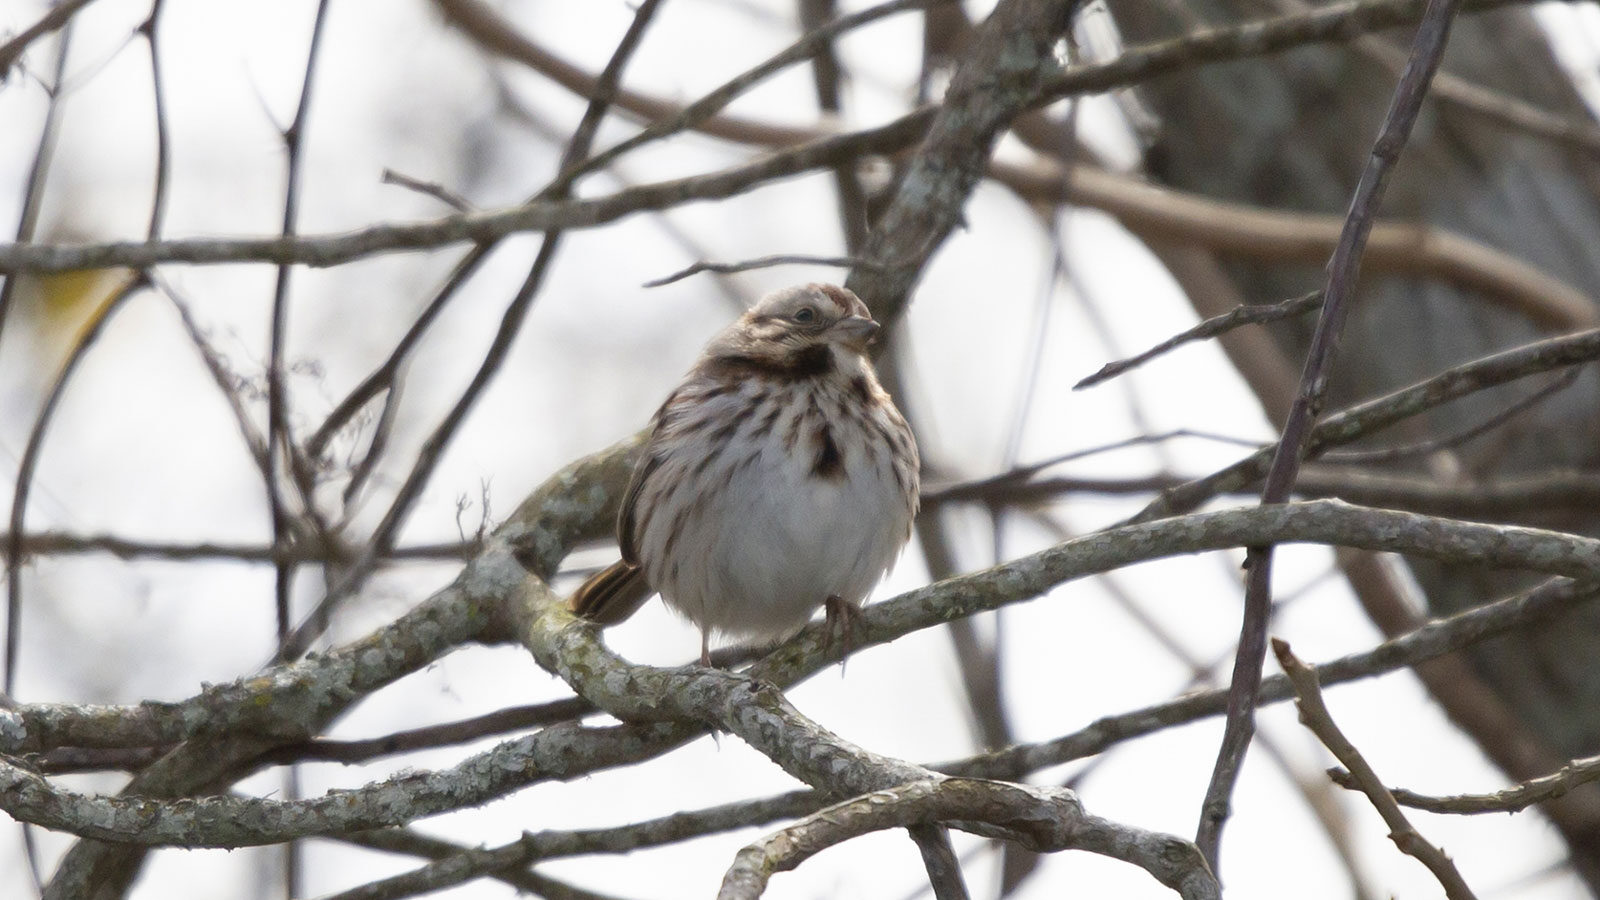 Song sparrow on a tree branch